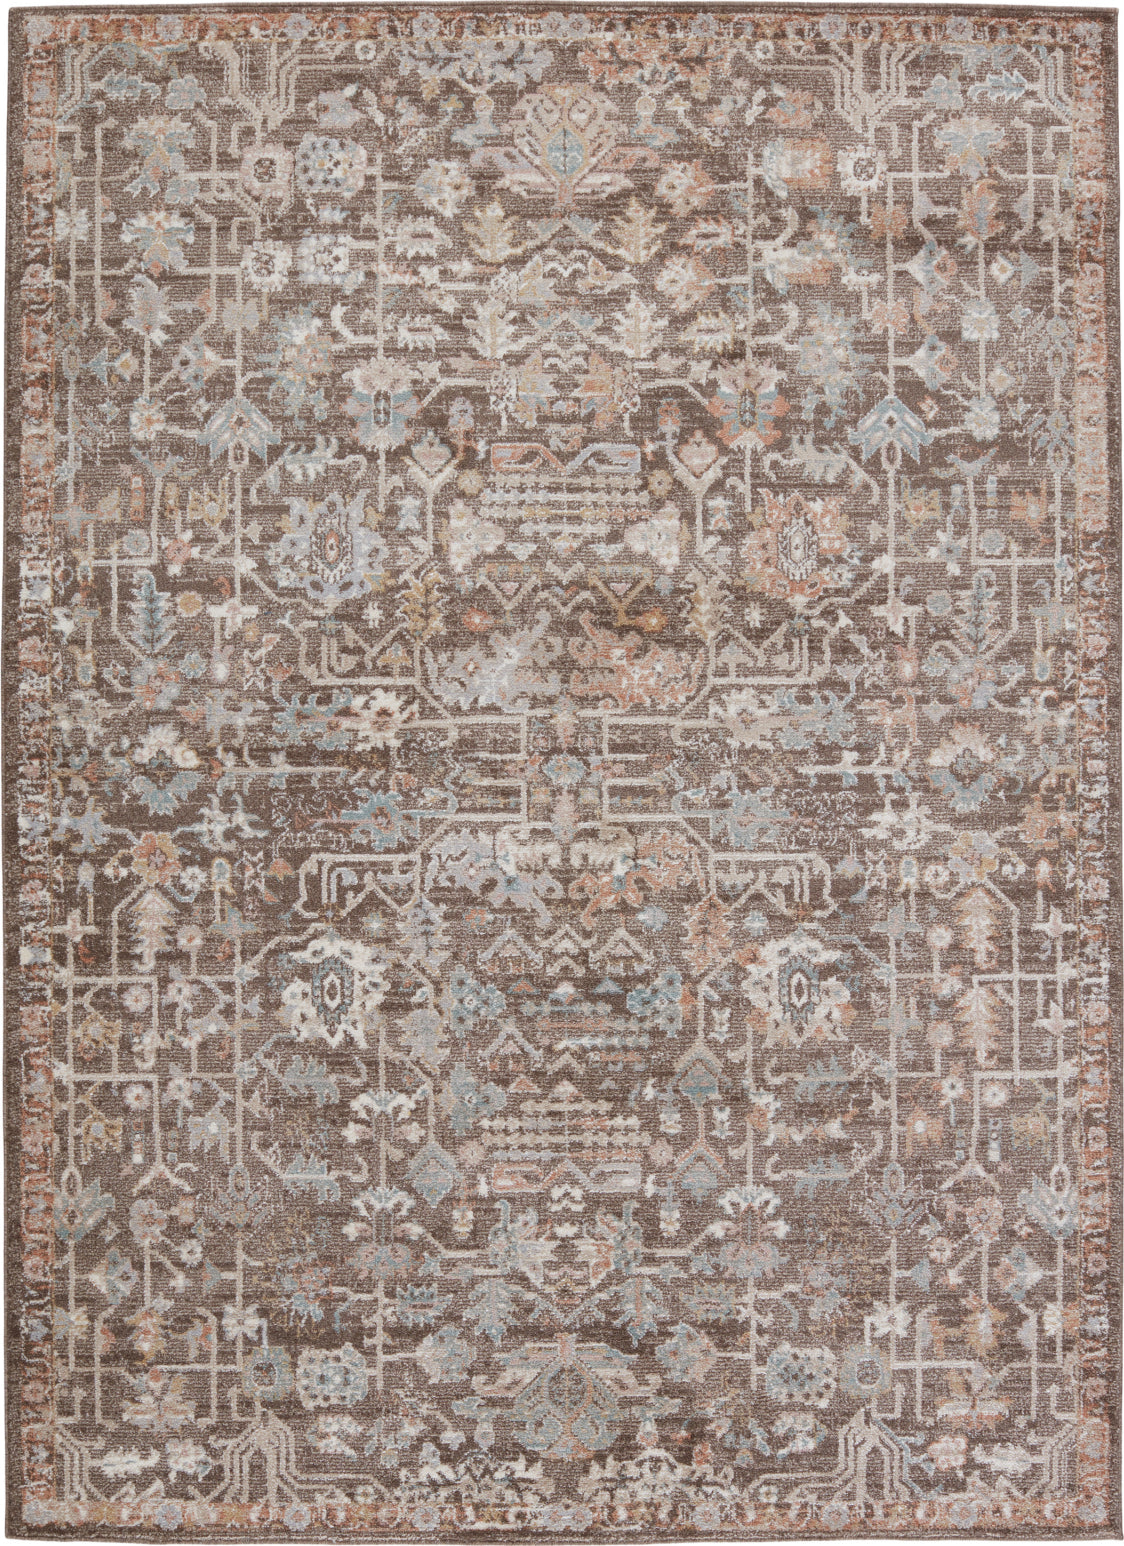 Jaipur Living Abrielle Mariette ABL03 Brown/Light Gray Area Rug by Vibe